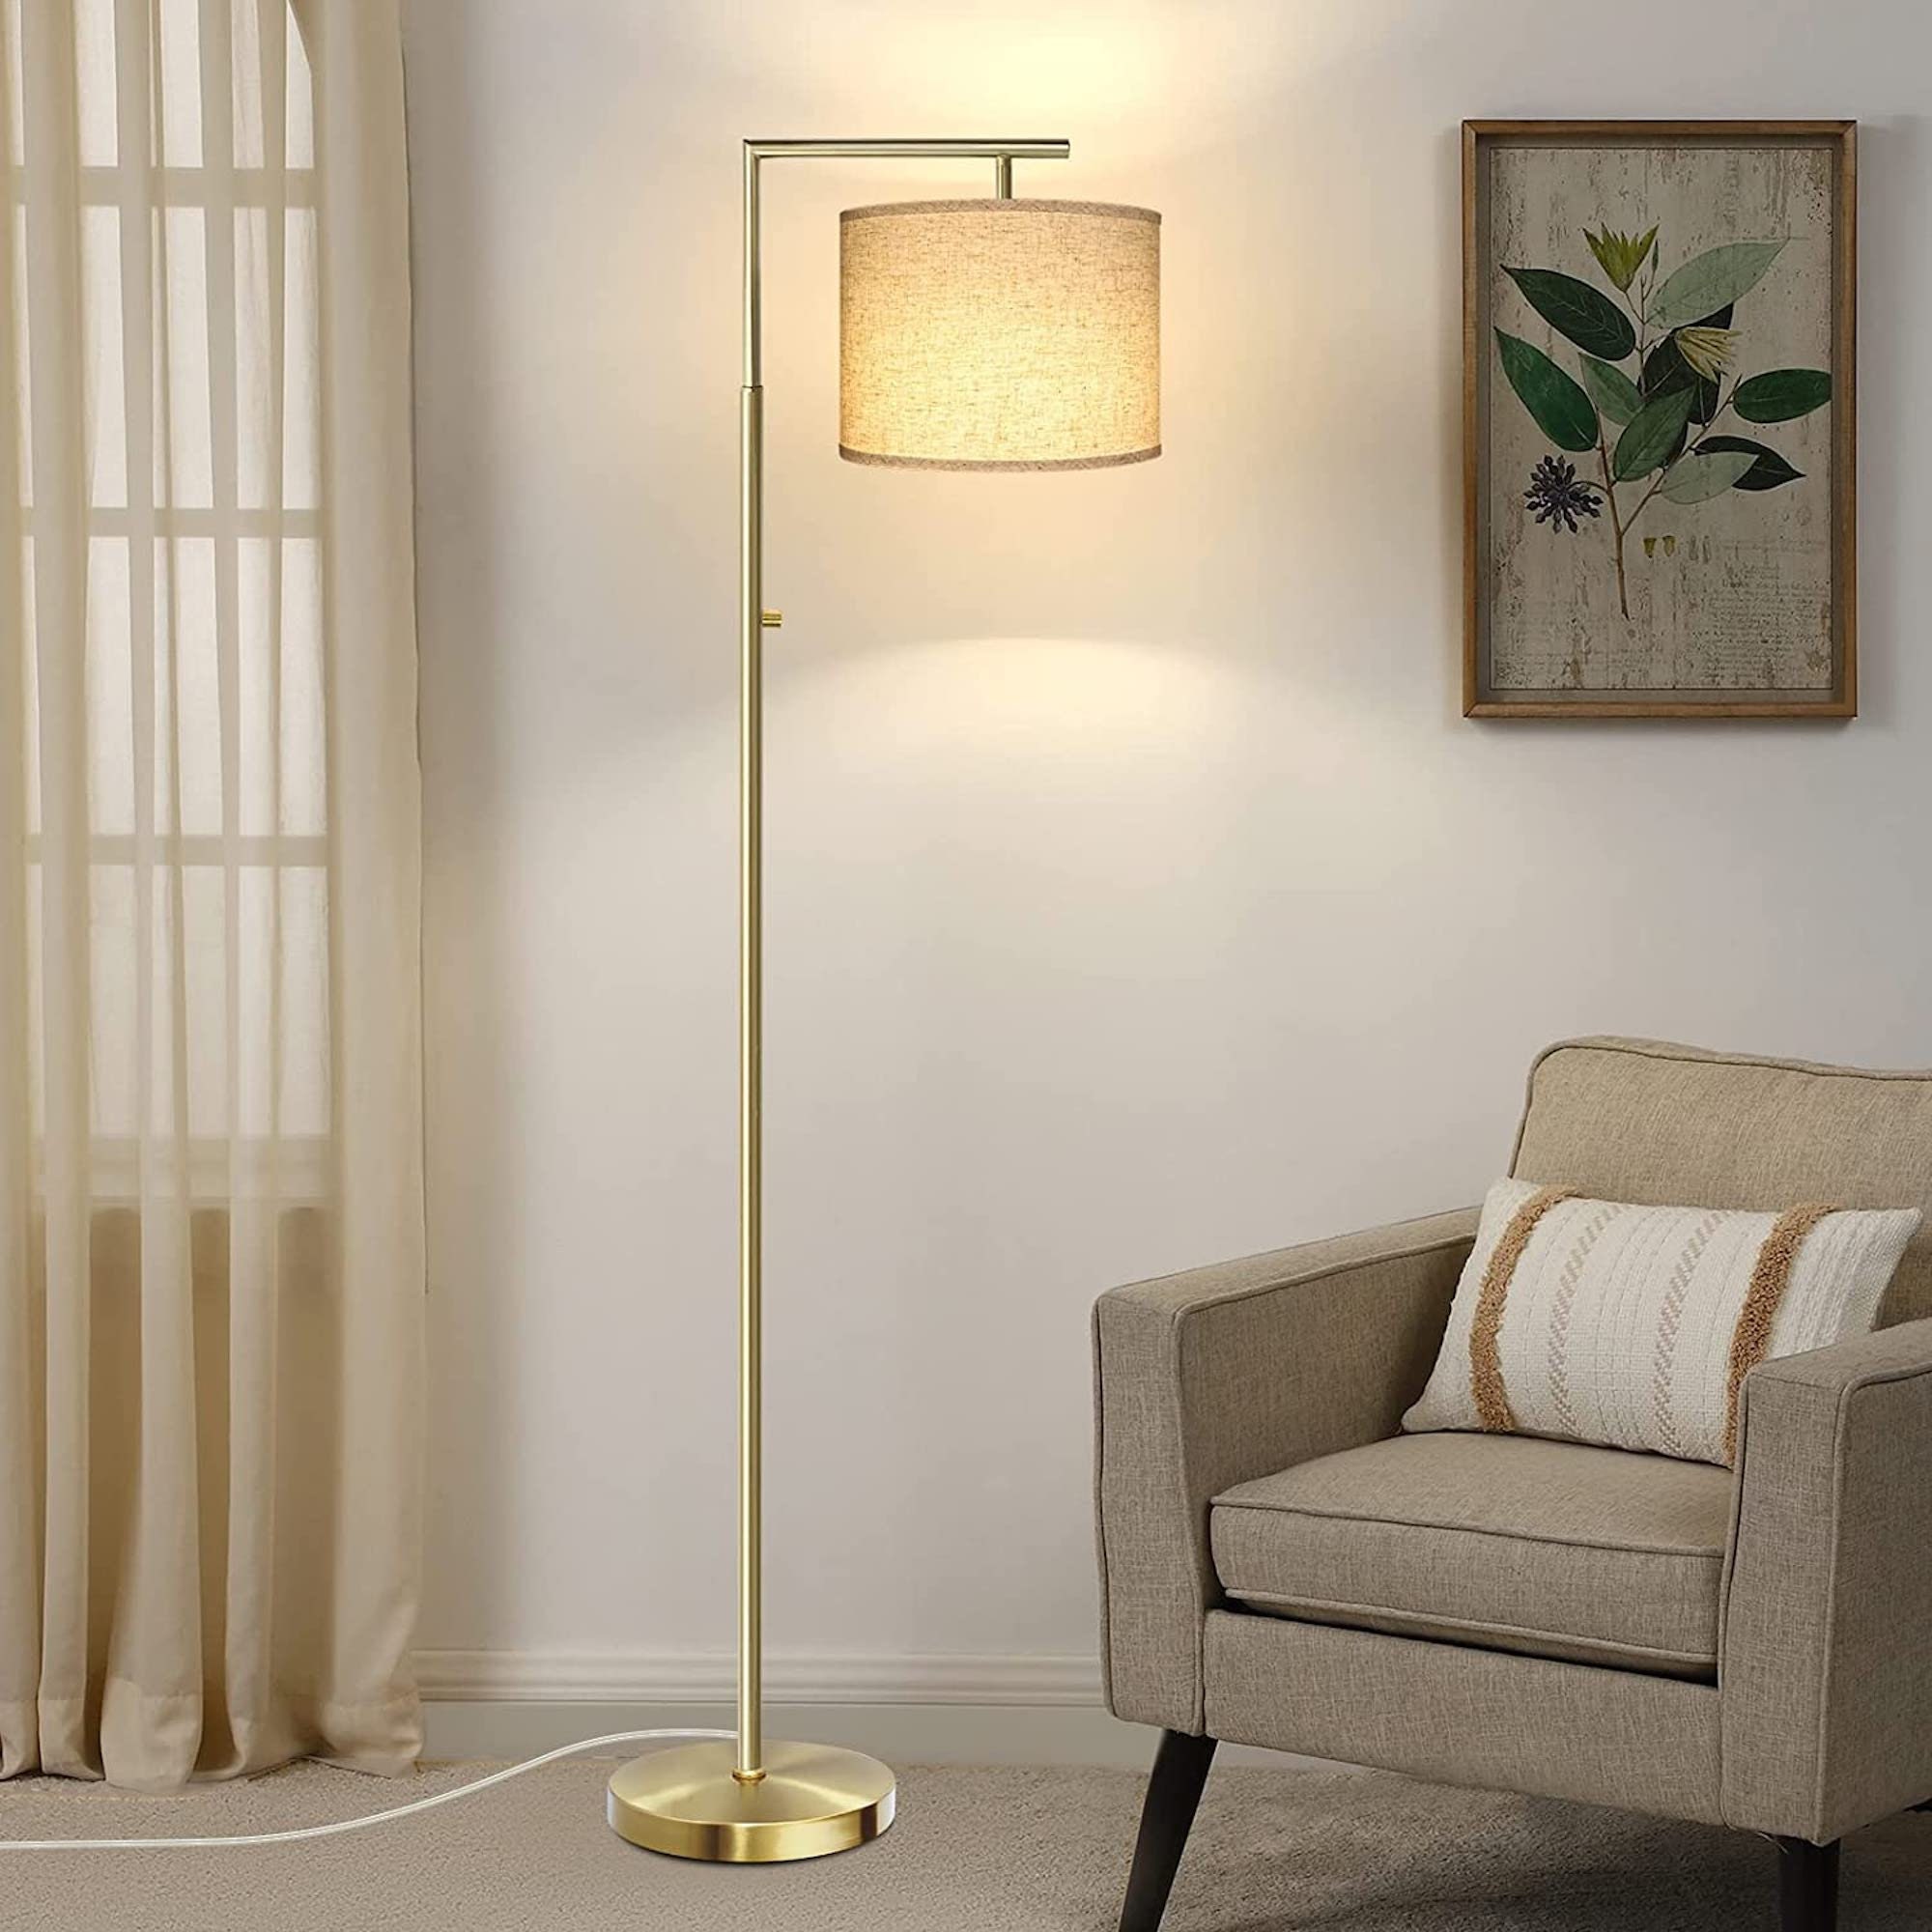 Rustic Upright Floor Light Vintage Tall Pole Light for Bedroom Living Room Office Dinning Room Reading Pedal Switch Hong-in Classic Standing Lamp with Twist Design LED Floor Lamp 